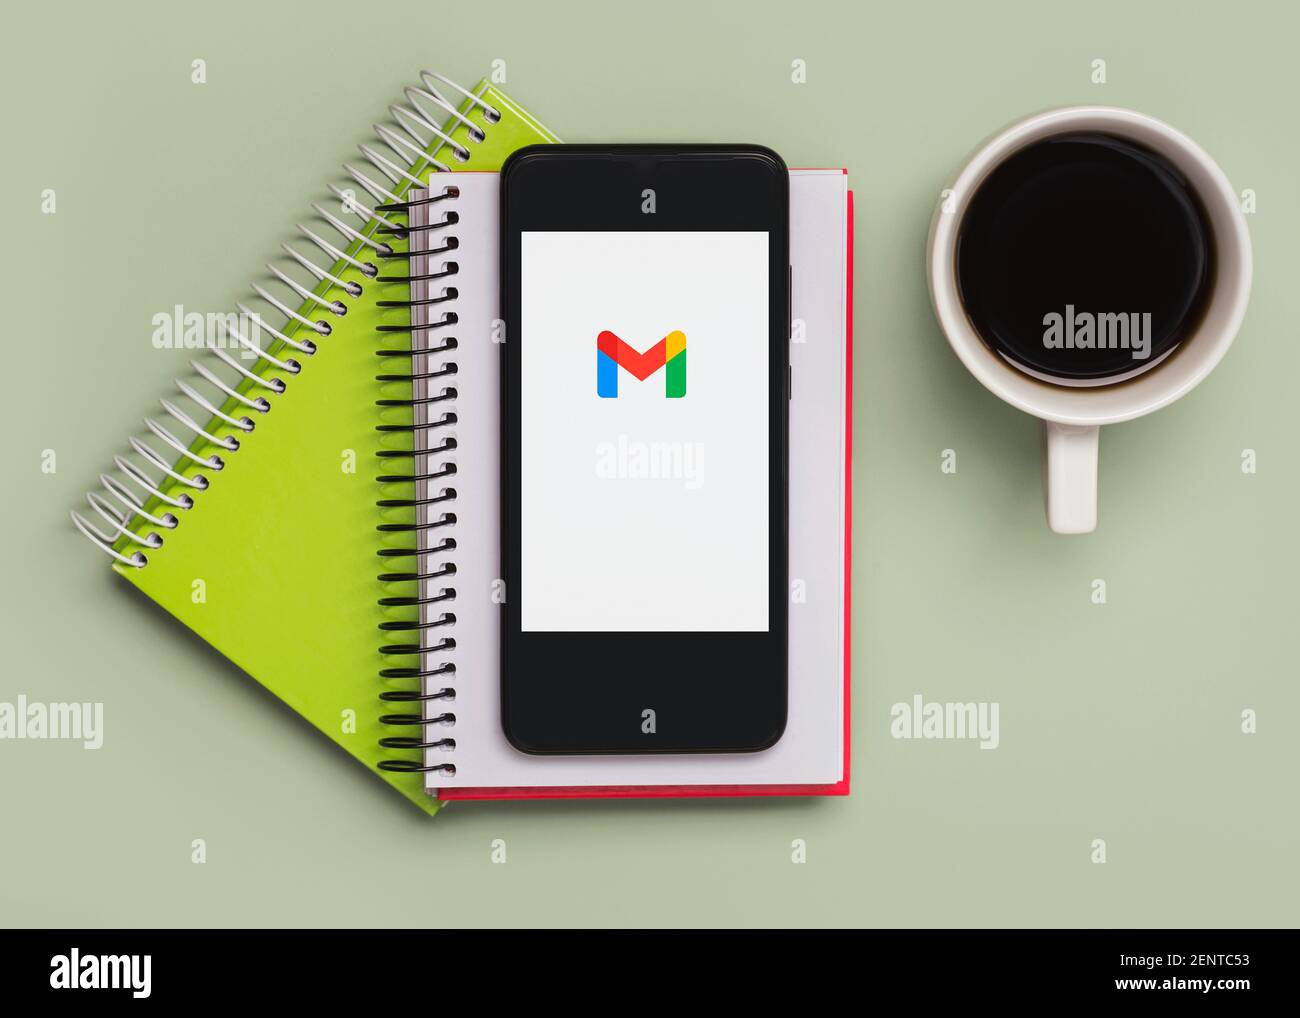 Gmail logo on black screen of smartphone with notebooks and cup of coffee on green background Stock Photo